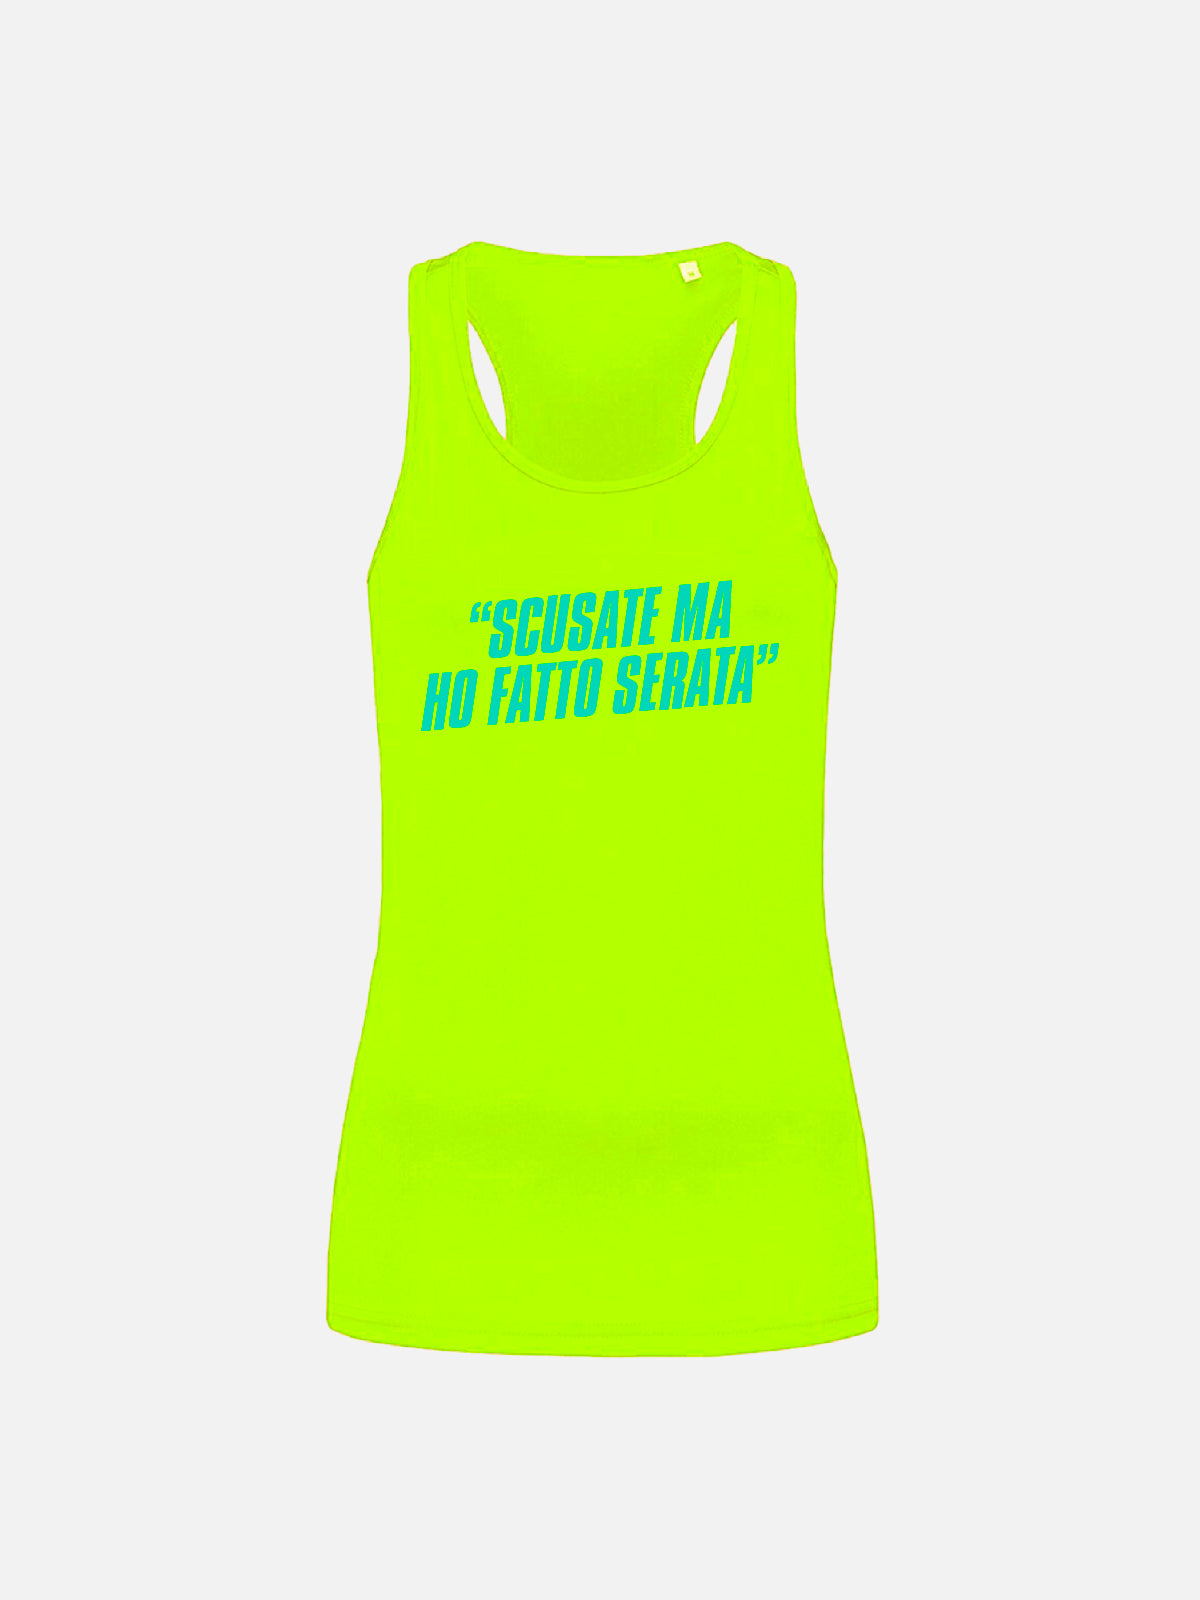 Tank top - “Sorry But I Had a Night Out”